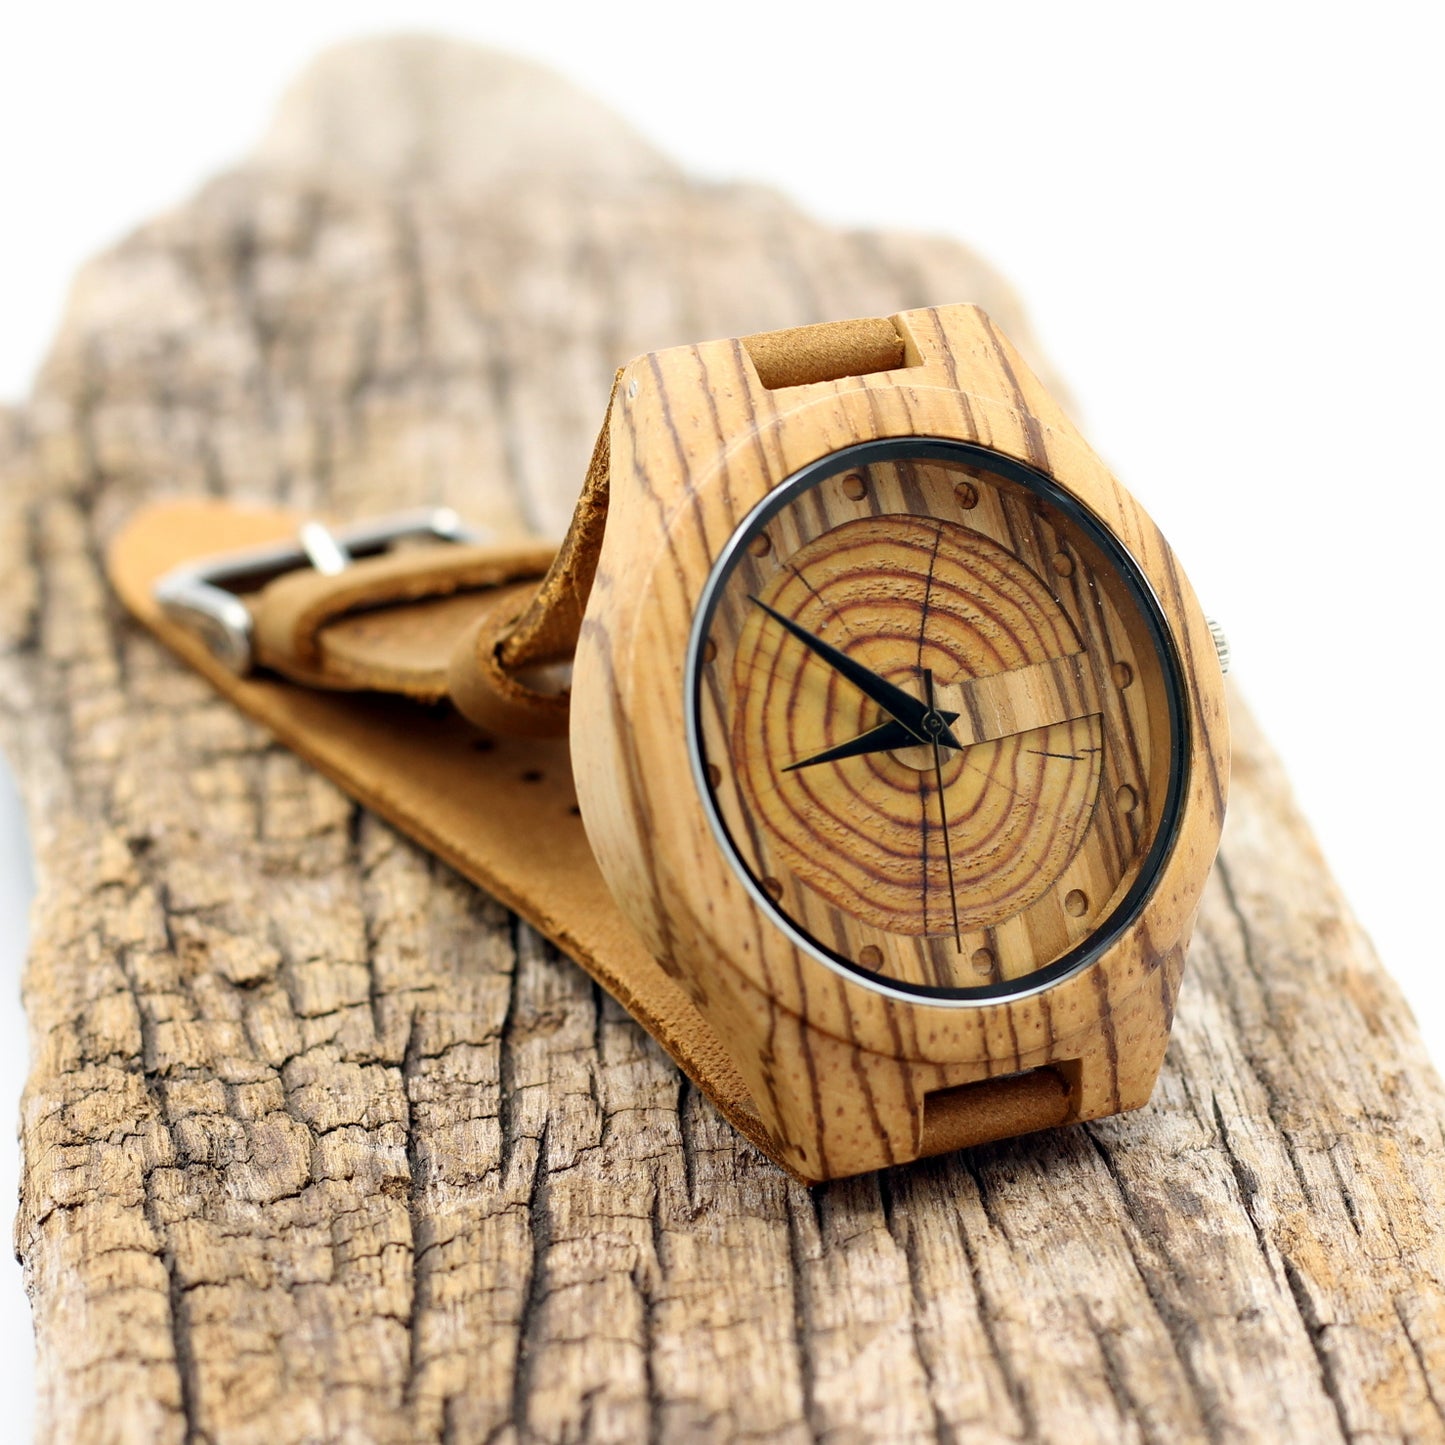 Men's zebra wooden watch with tan leather strap. Wood cross section face, engrave a message on the back. Hashtag Bamboo South Africa.